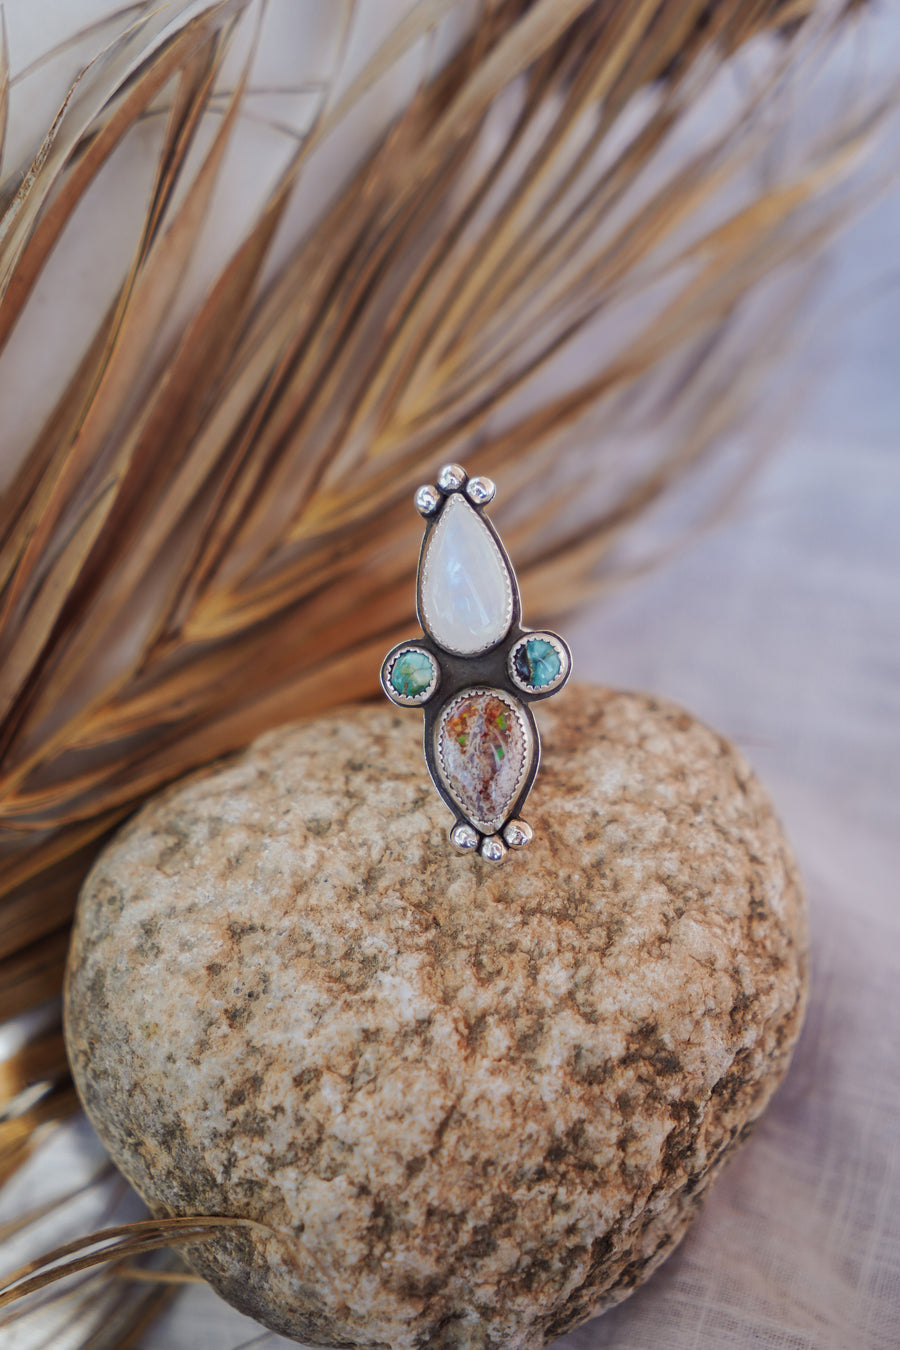 Enchantress Ring in Mexican Fire Opal, Rainbow Moonstone, & Sierra Nevada Turquoise (Size 8.5)